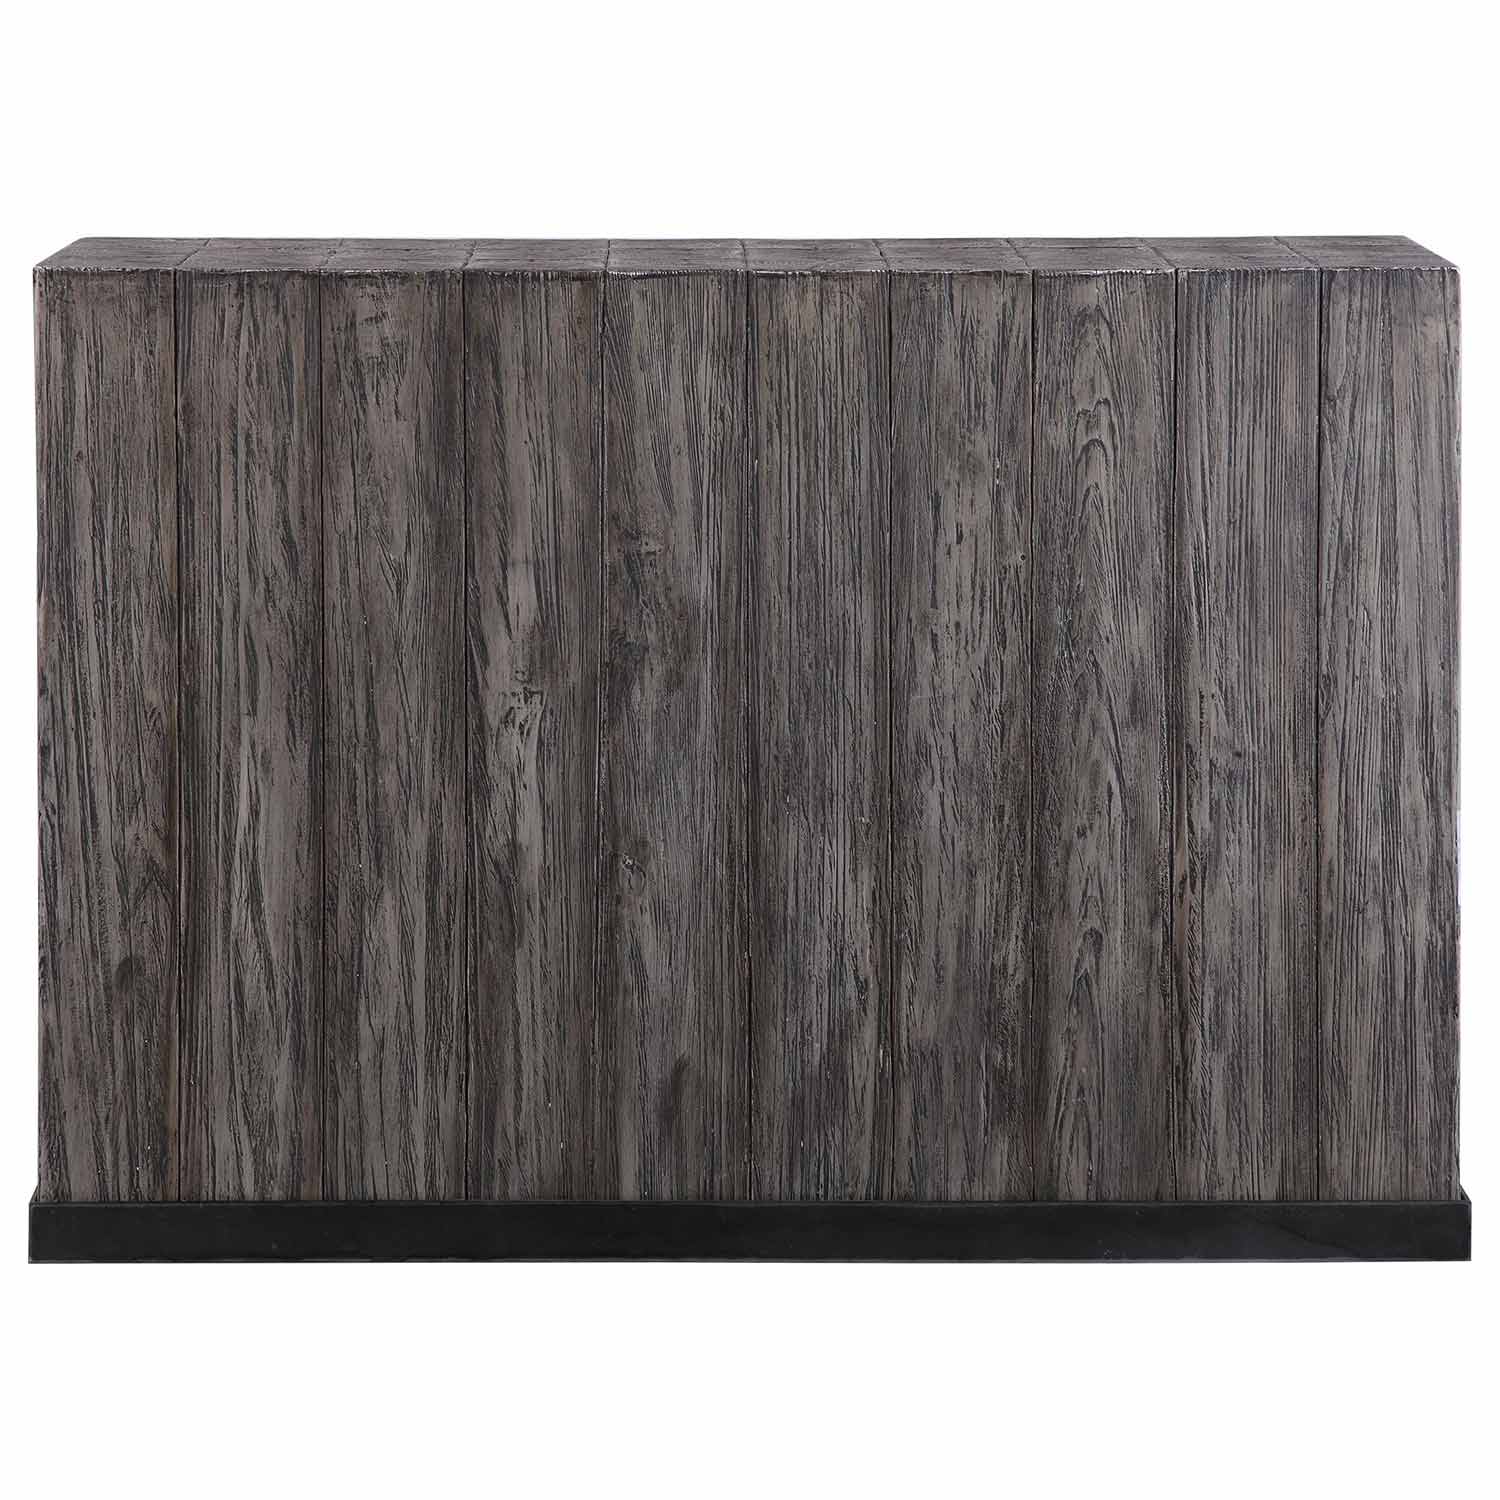 Uttermost Latham Reclaimed Wood Console Table